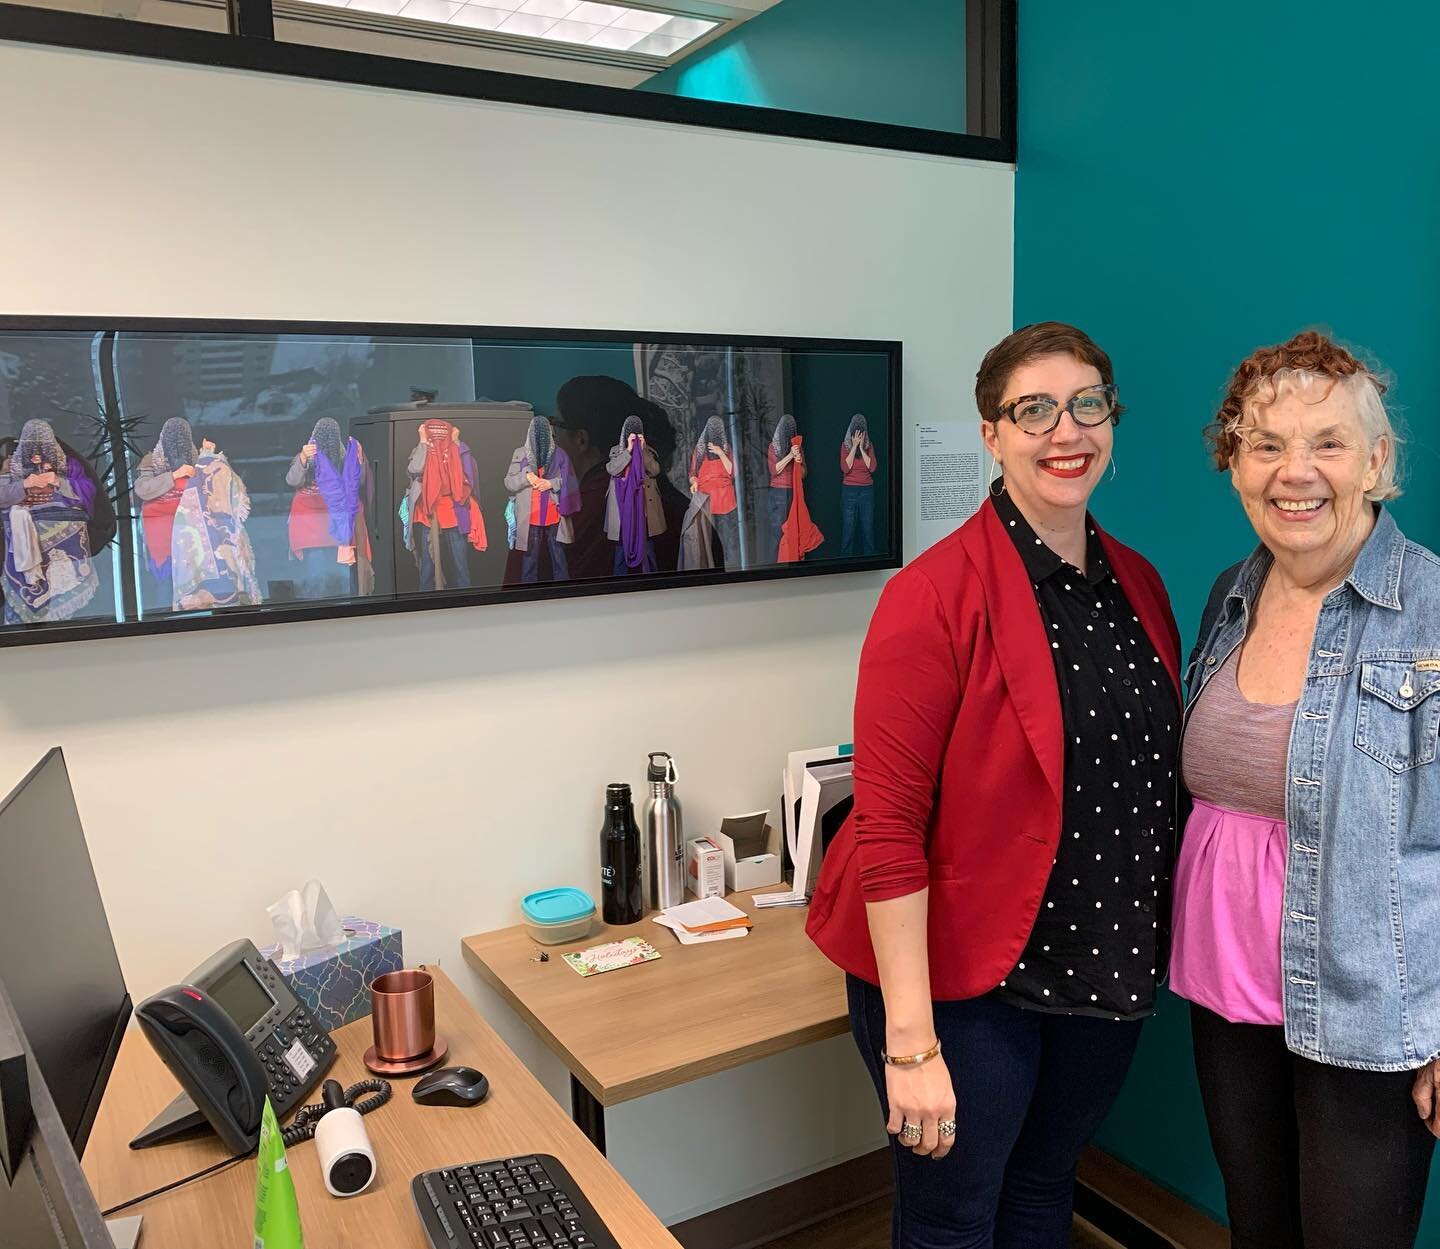 @ariel4somersetward chose Worn Red Panorama for her office. Ariel is the amazing Councillor for Somerset Ward on Ottawa City Council. 

Thank you to @publicartottawa for all your efforts to make Ottawa a wonderful place for artists. And to @shoebox_s